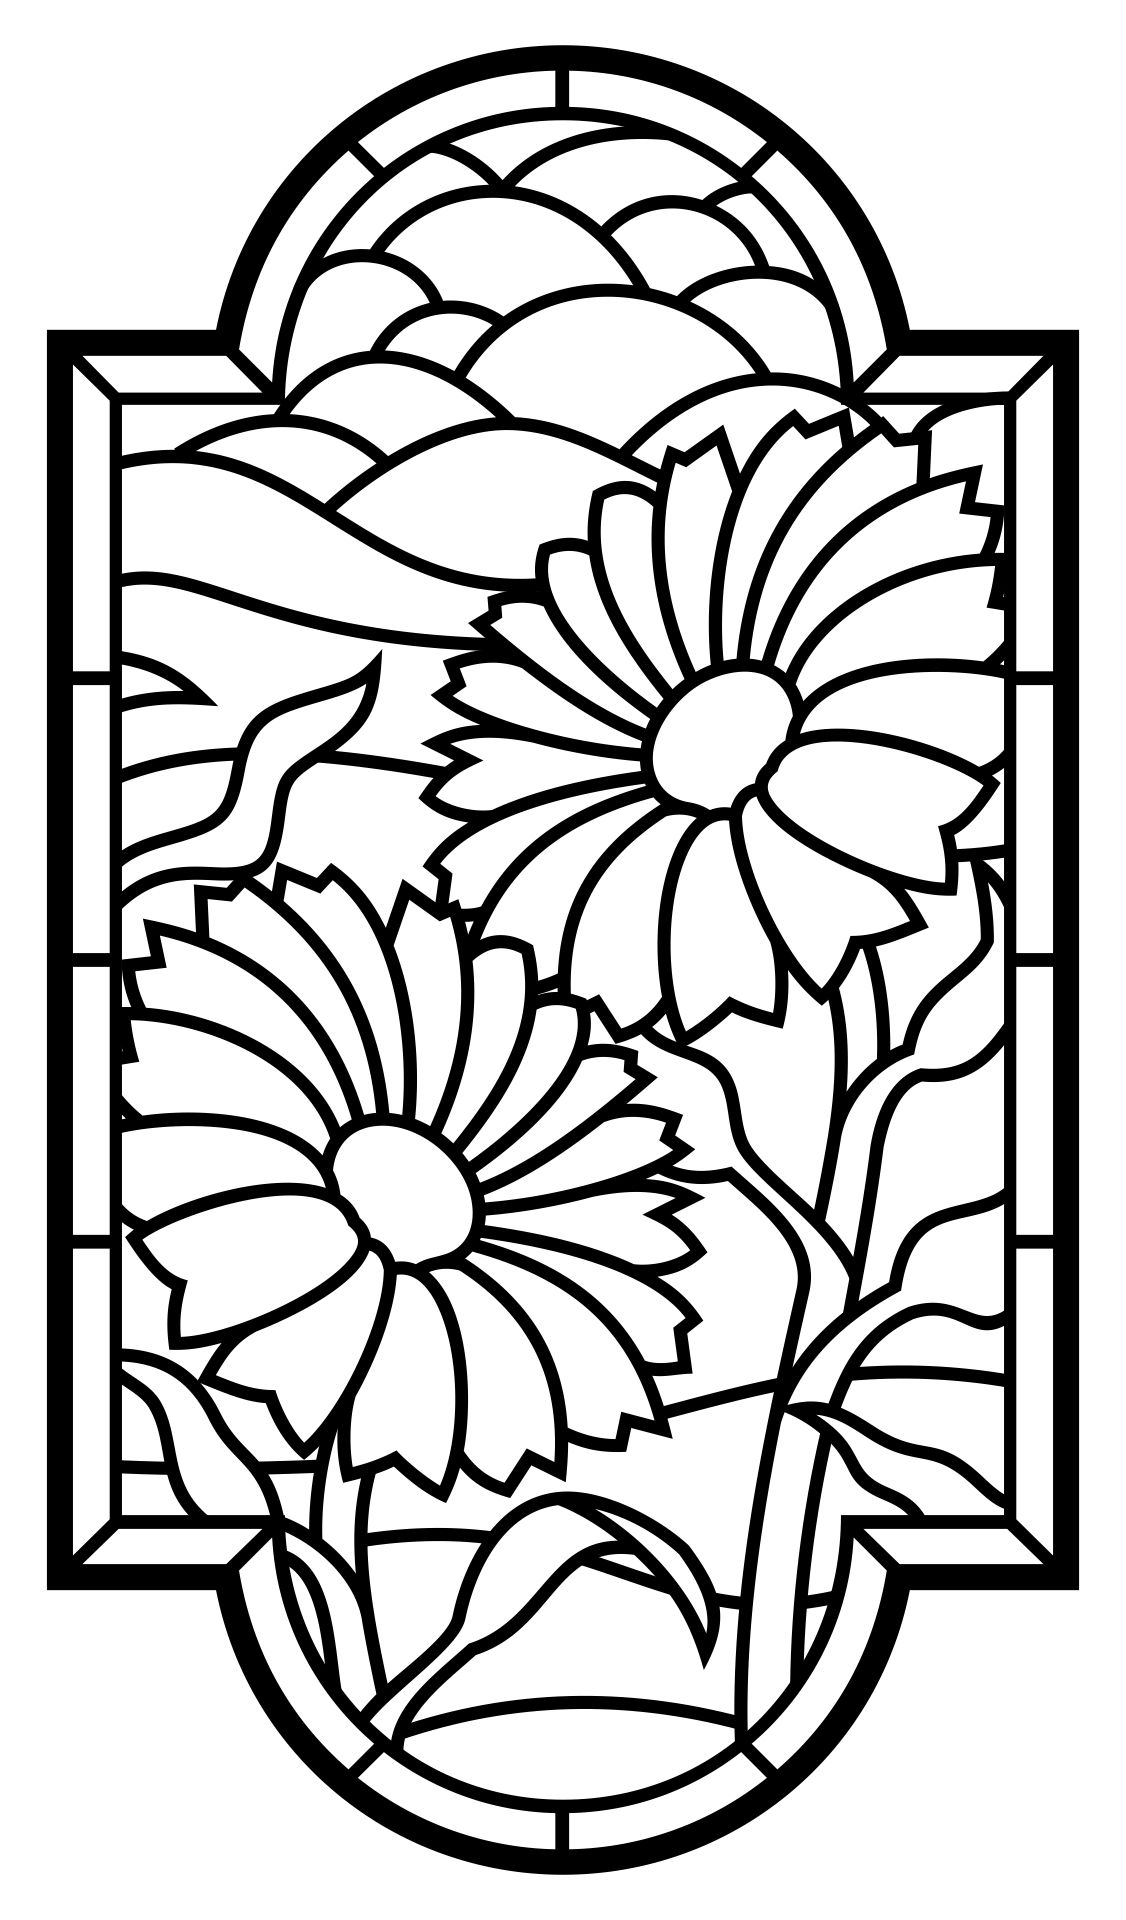 Printable Sunflower Stained Glass Patterns